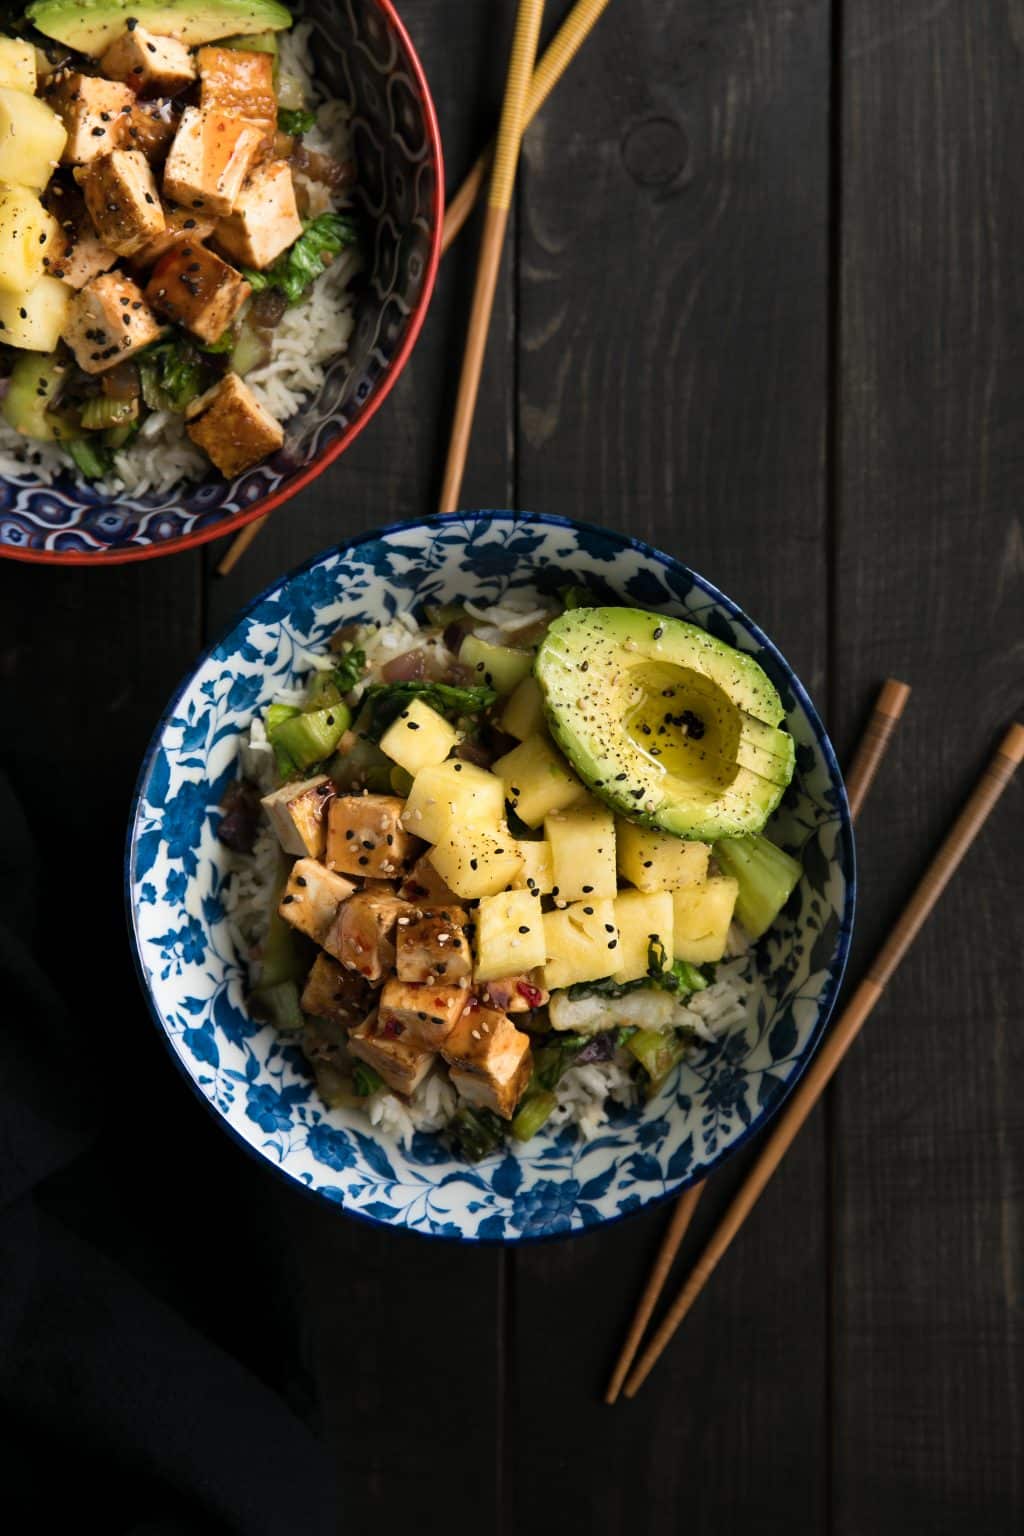 Tofu smothered in Sweet Chili Sauce with coconut rice, sautéed bok choy, pineapple and creamy avocado.